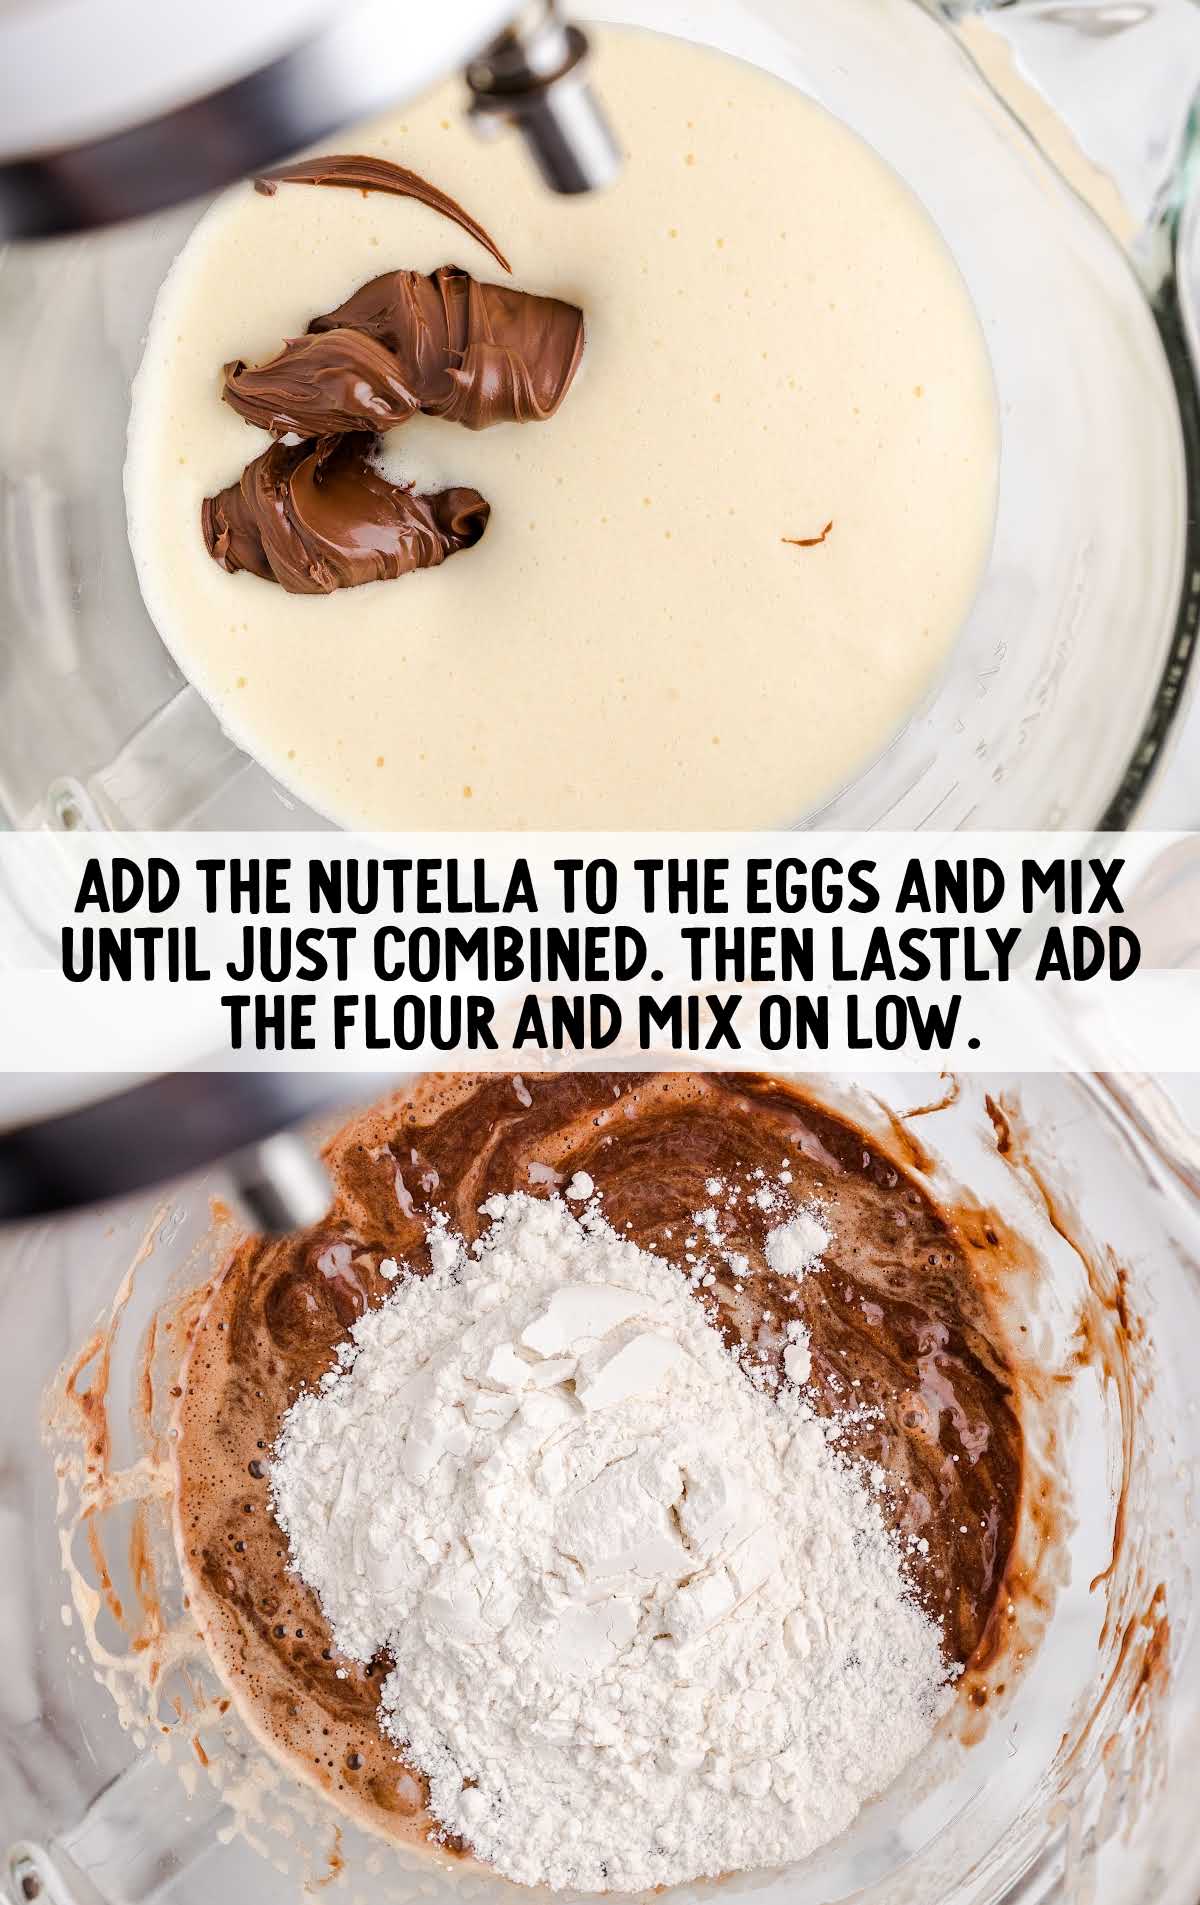 Nutella added to the egg and mixed together